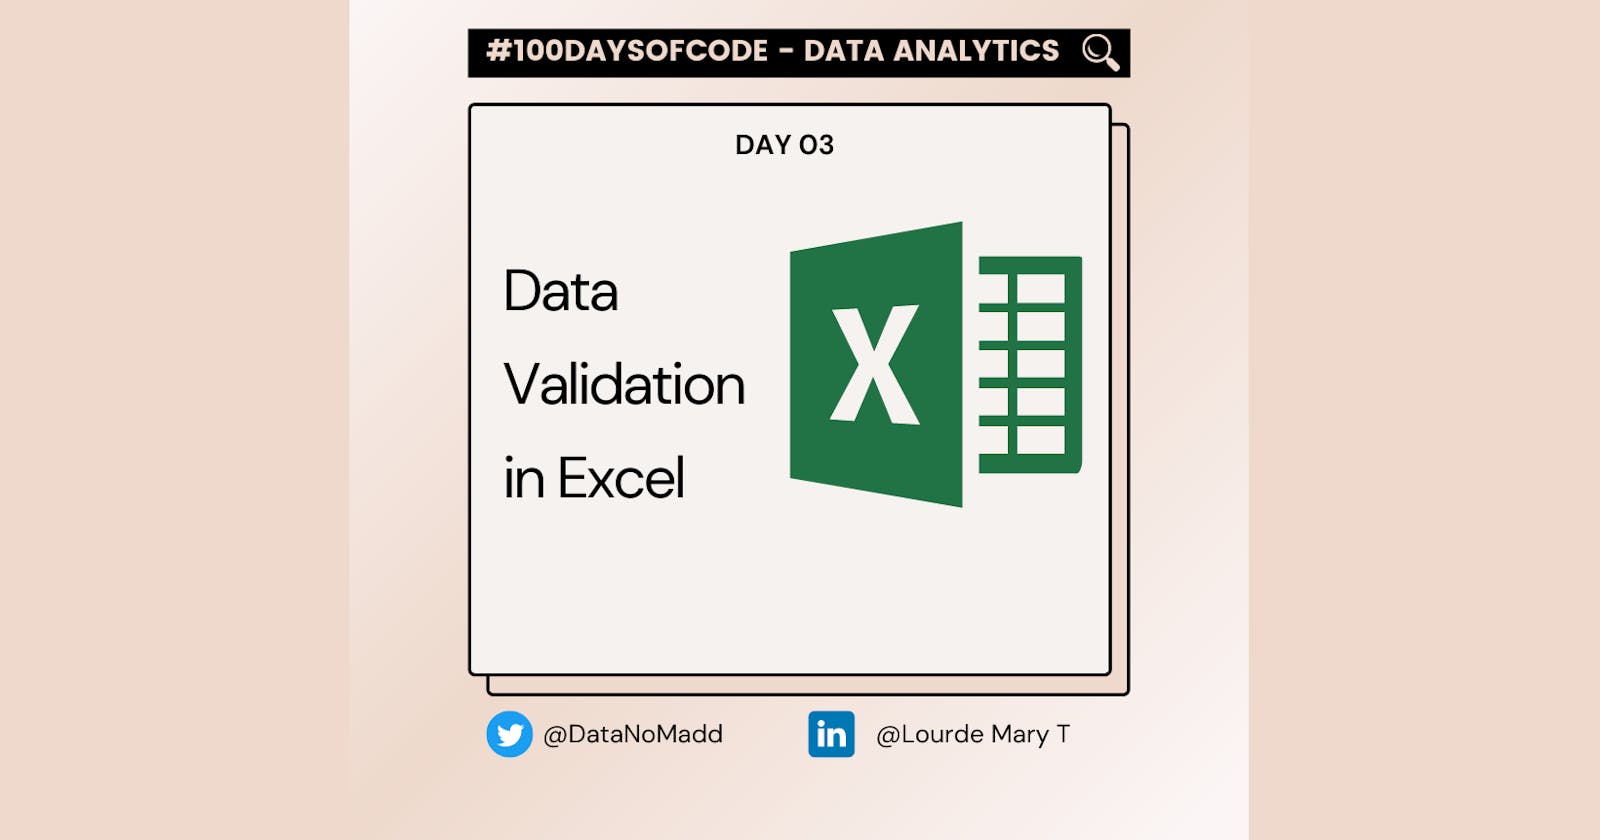 Day 03 of 100 Days Of Code in Data Analytics : Data Validation in Excel